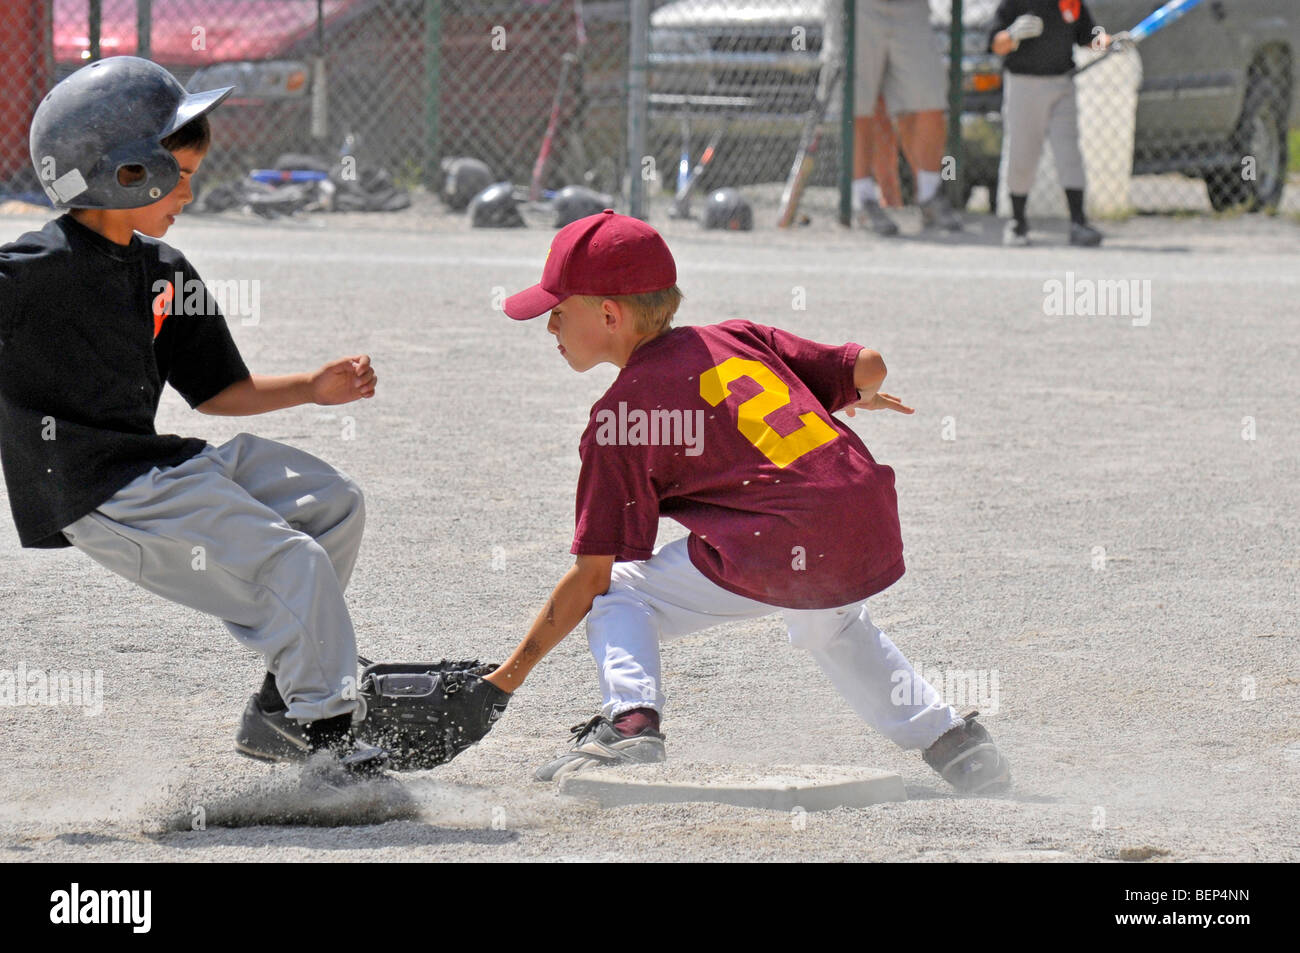 Little league baseball action with 8 and 9 year old players Stock Photo